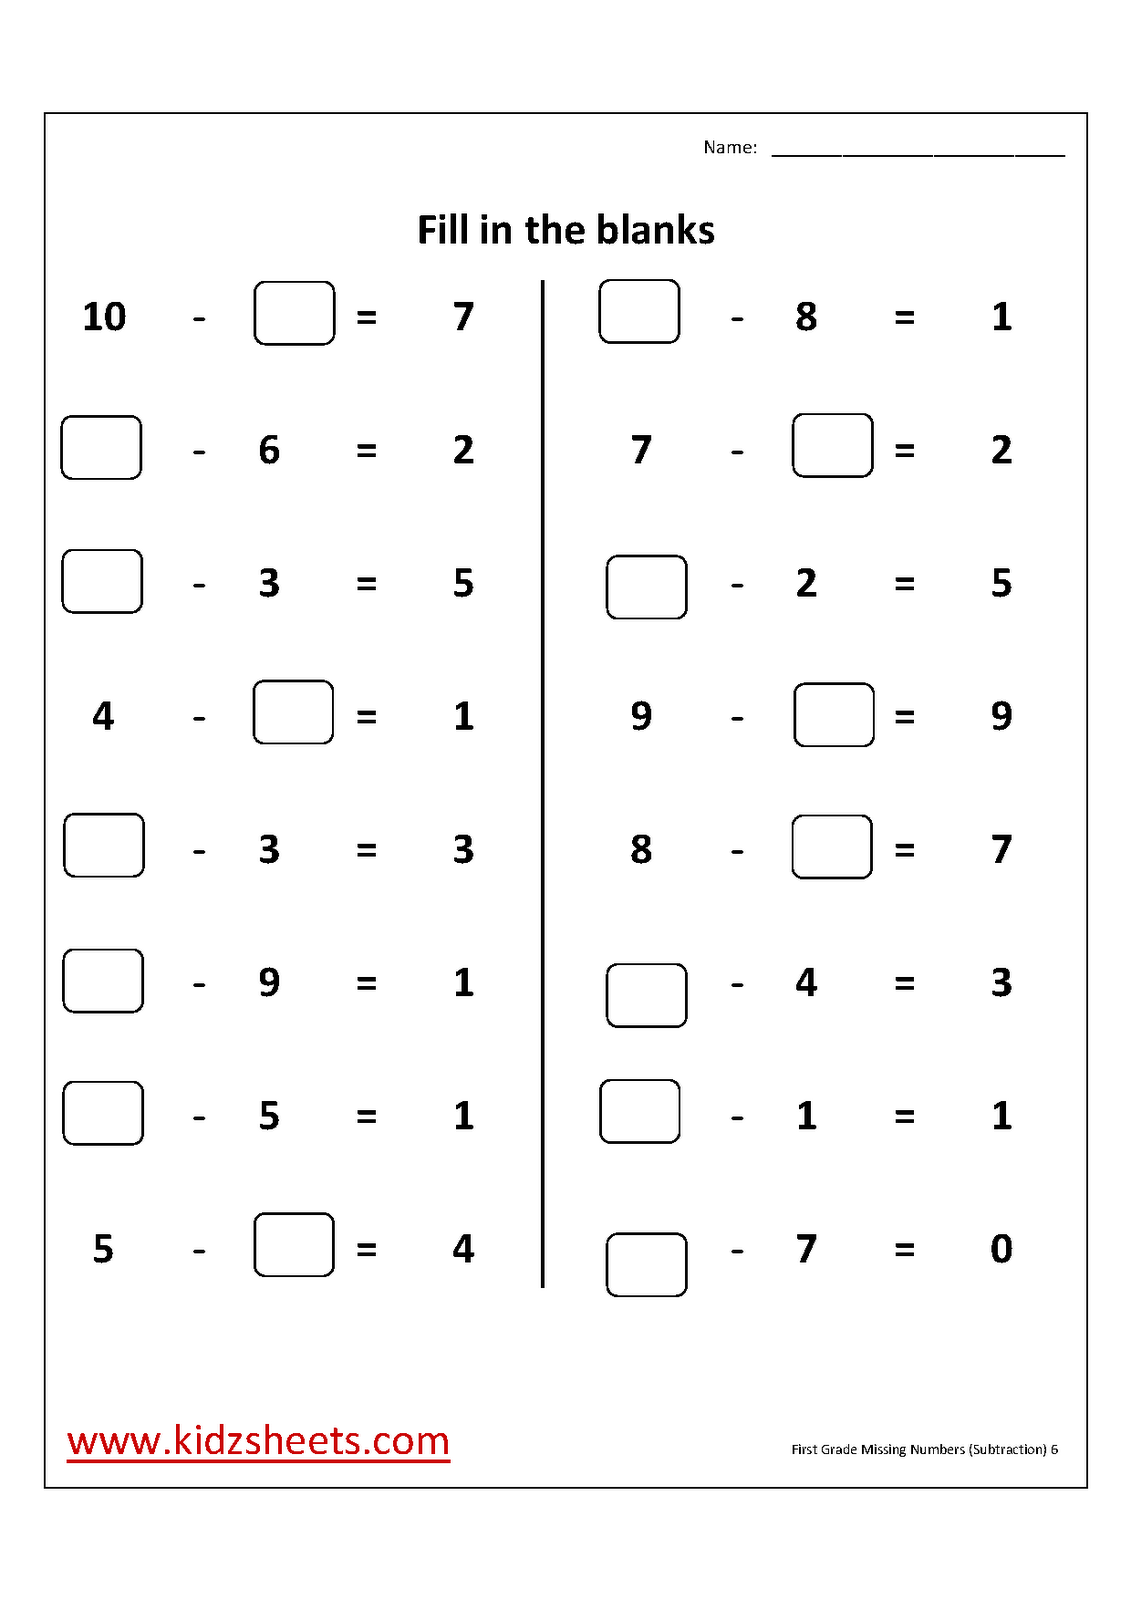 missing-numbers-in-addition-and-subtraction-worksheets-algebra